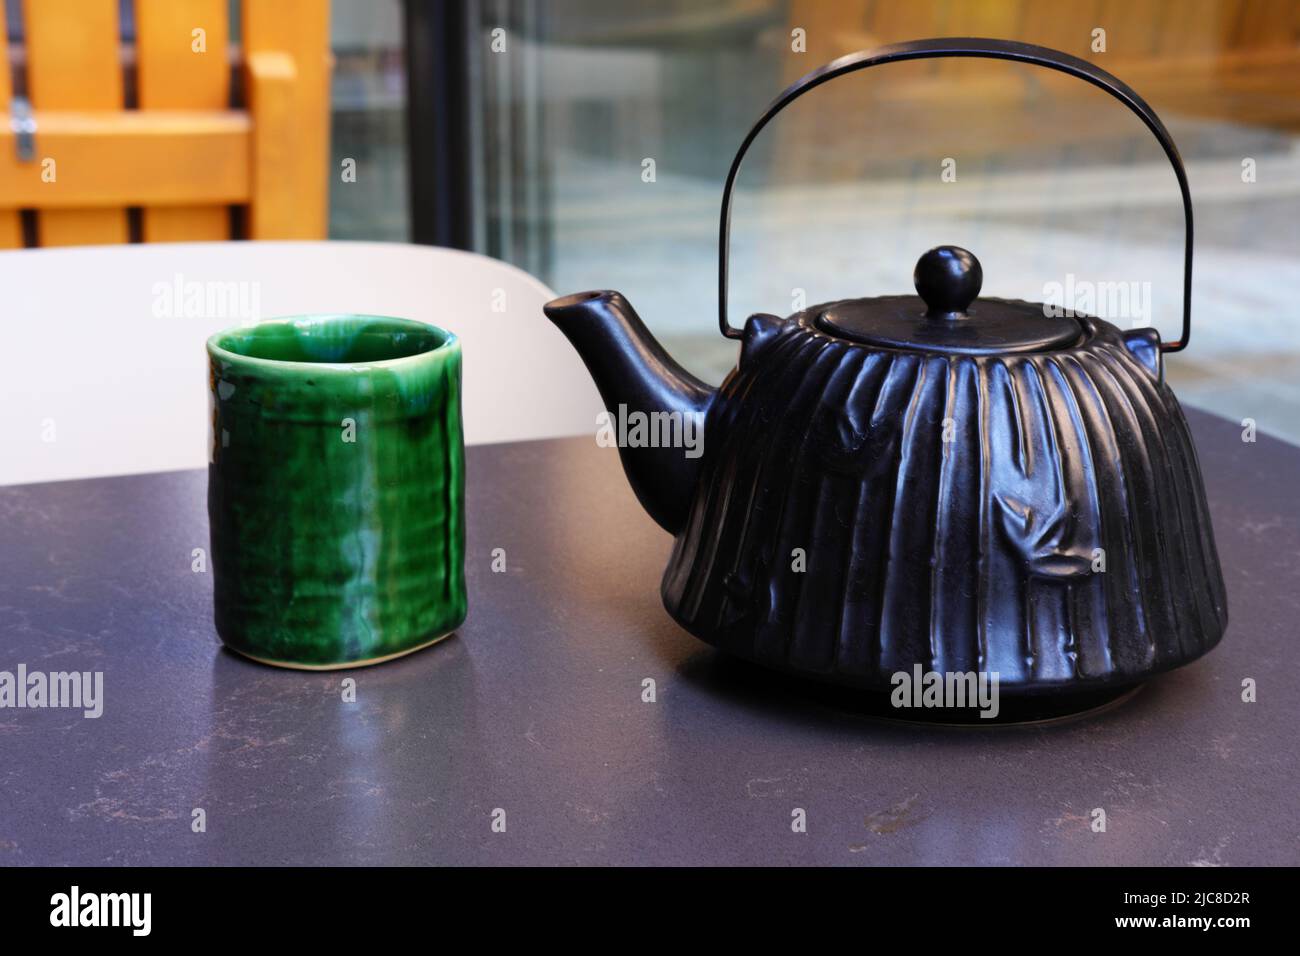 Chinese style vintage ceramic green tea mug and teapot on table Stock Photo